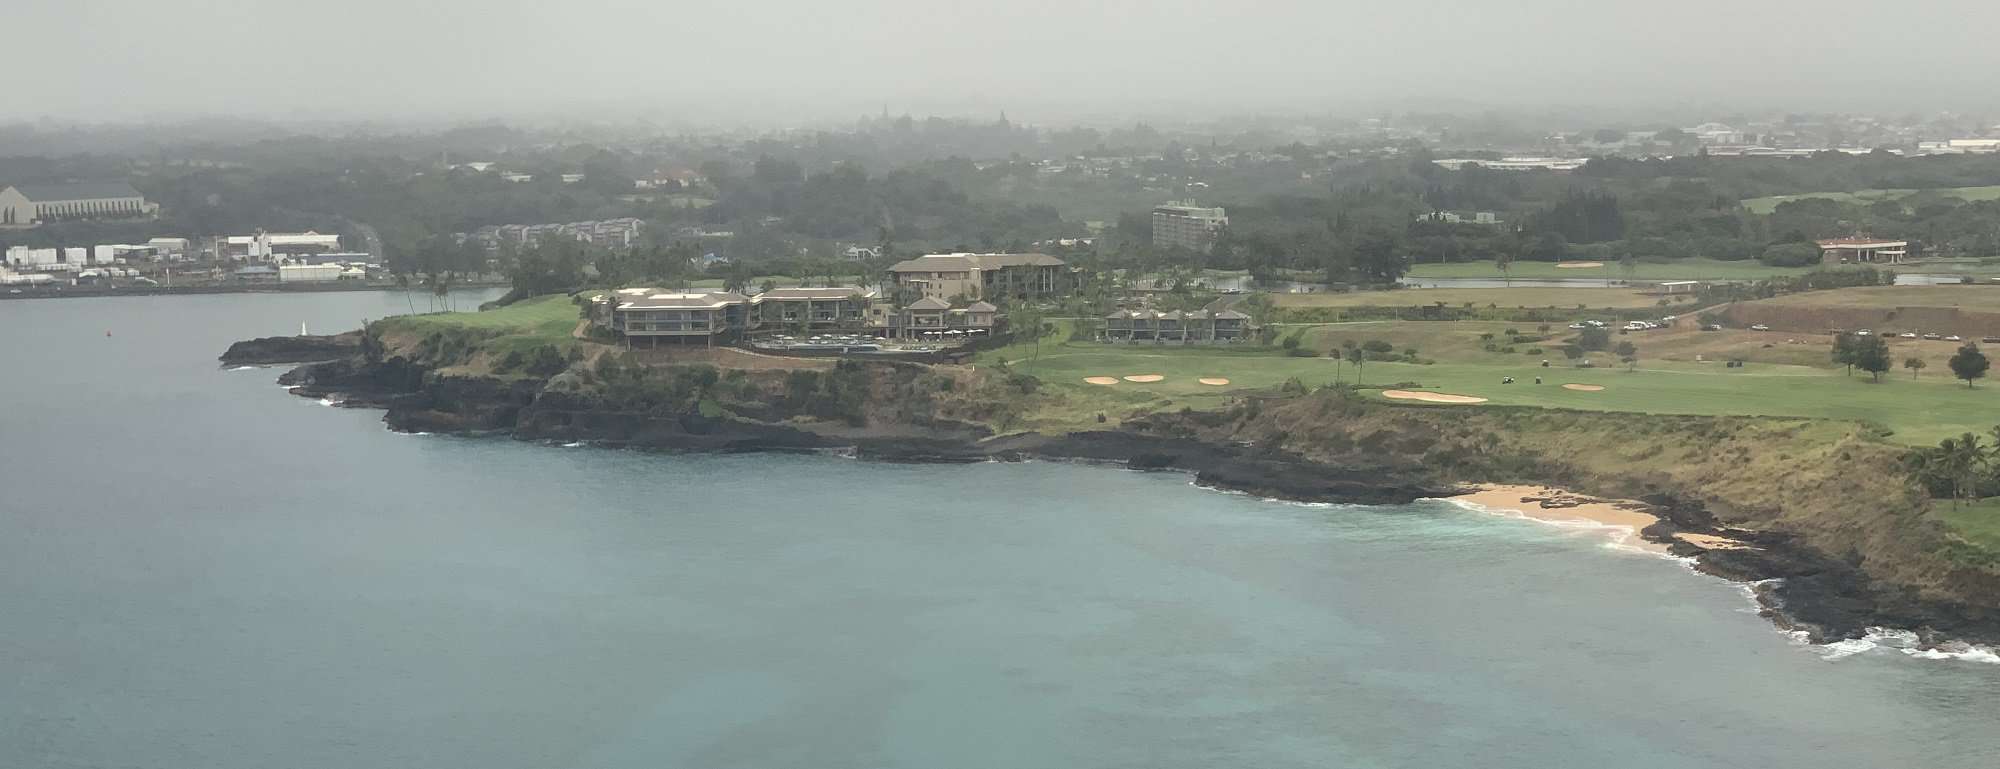 Flying in to Lihue Airport